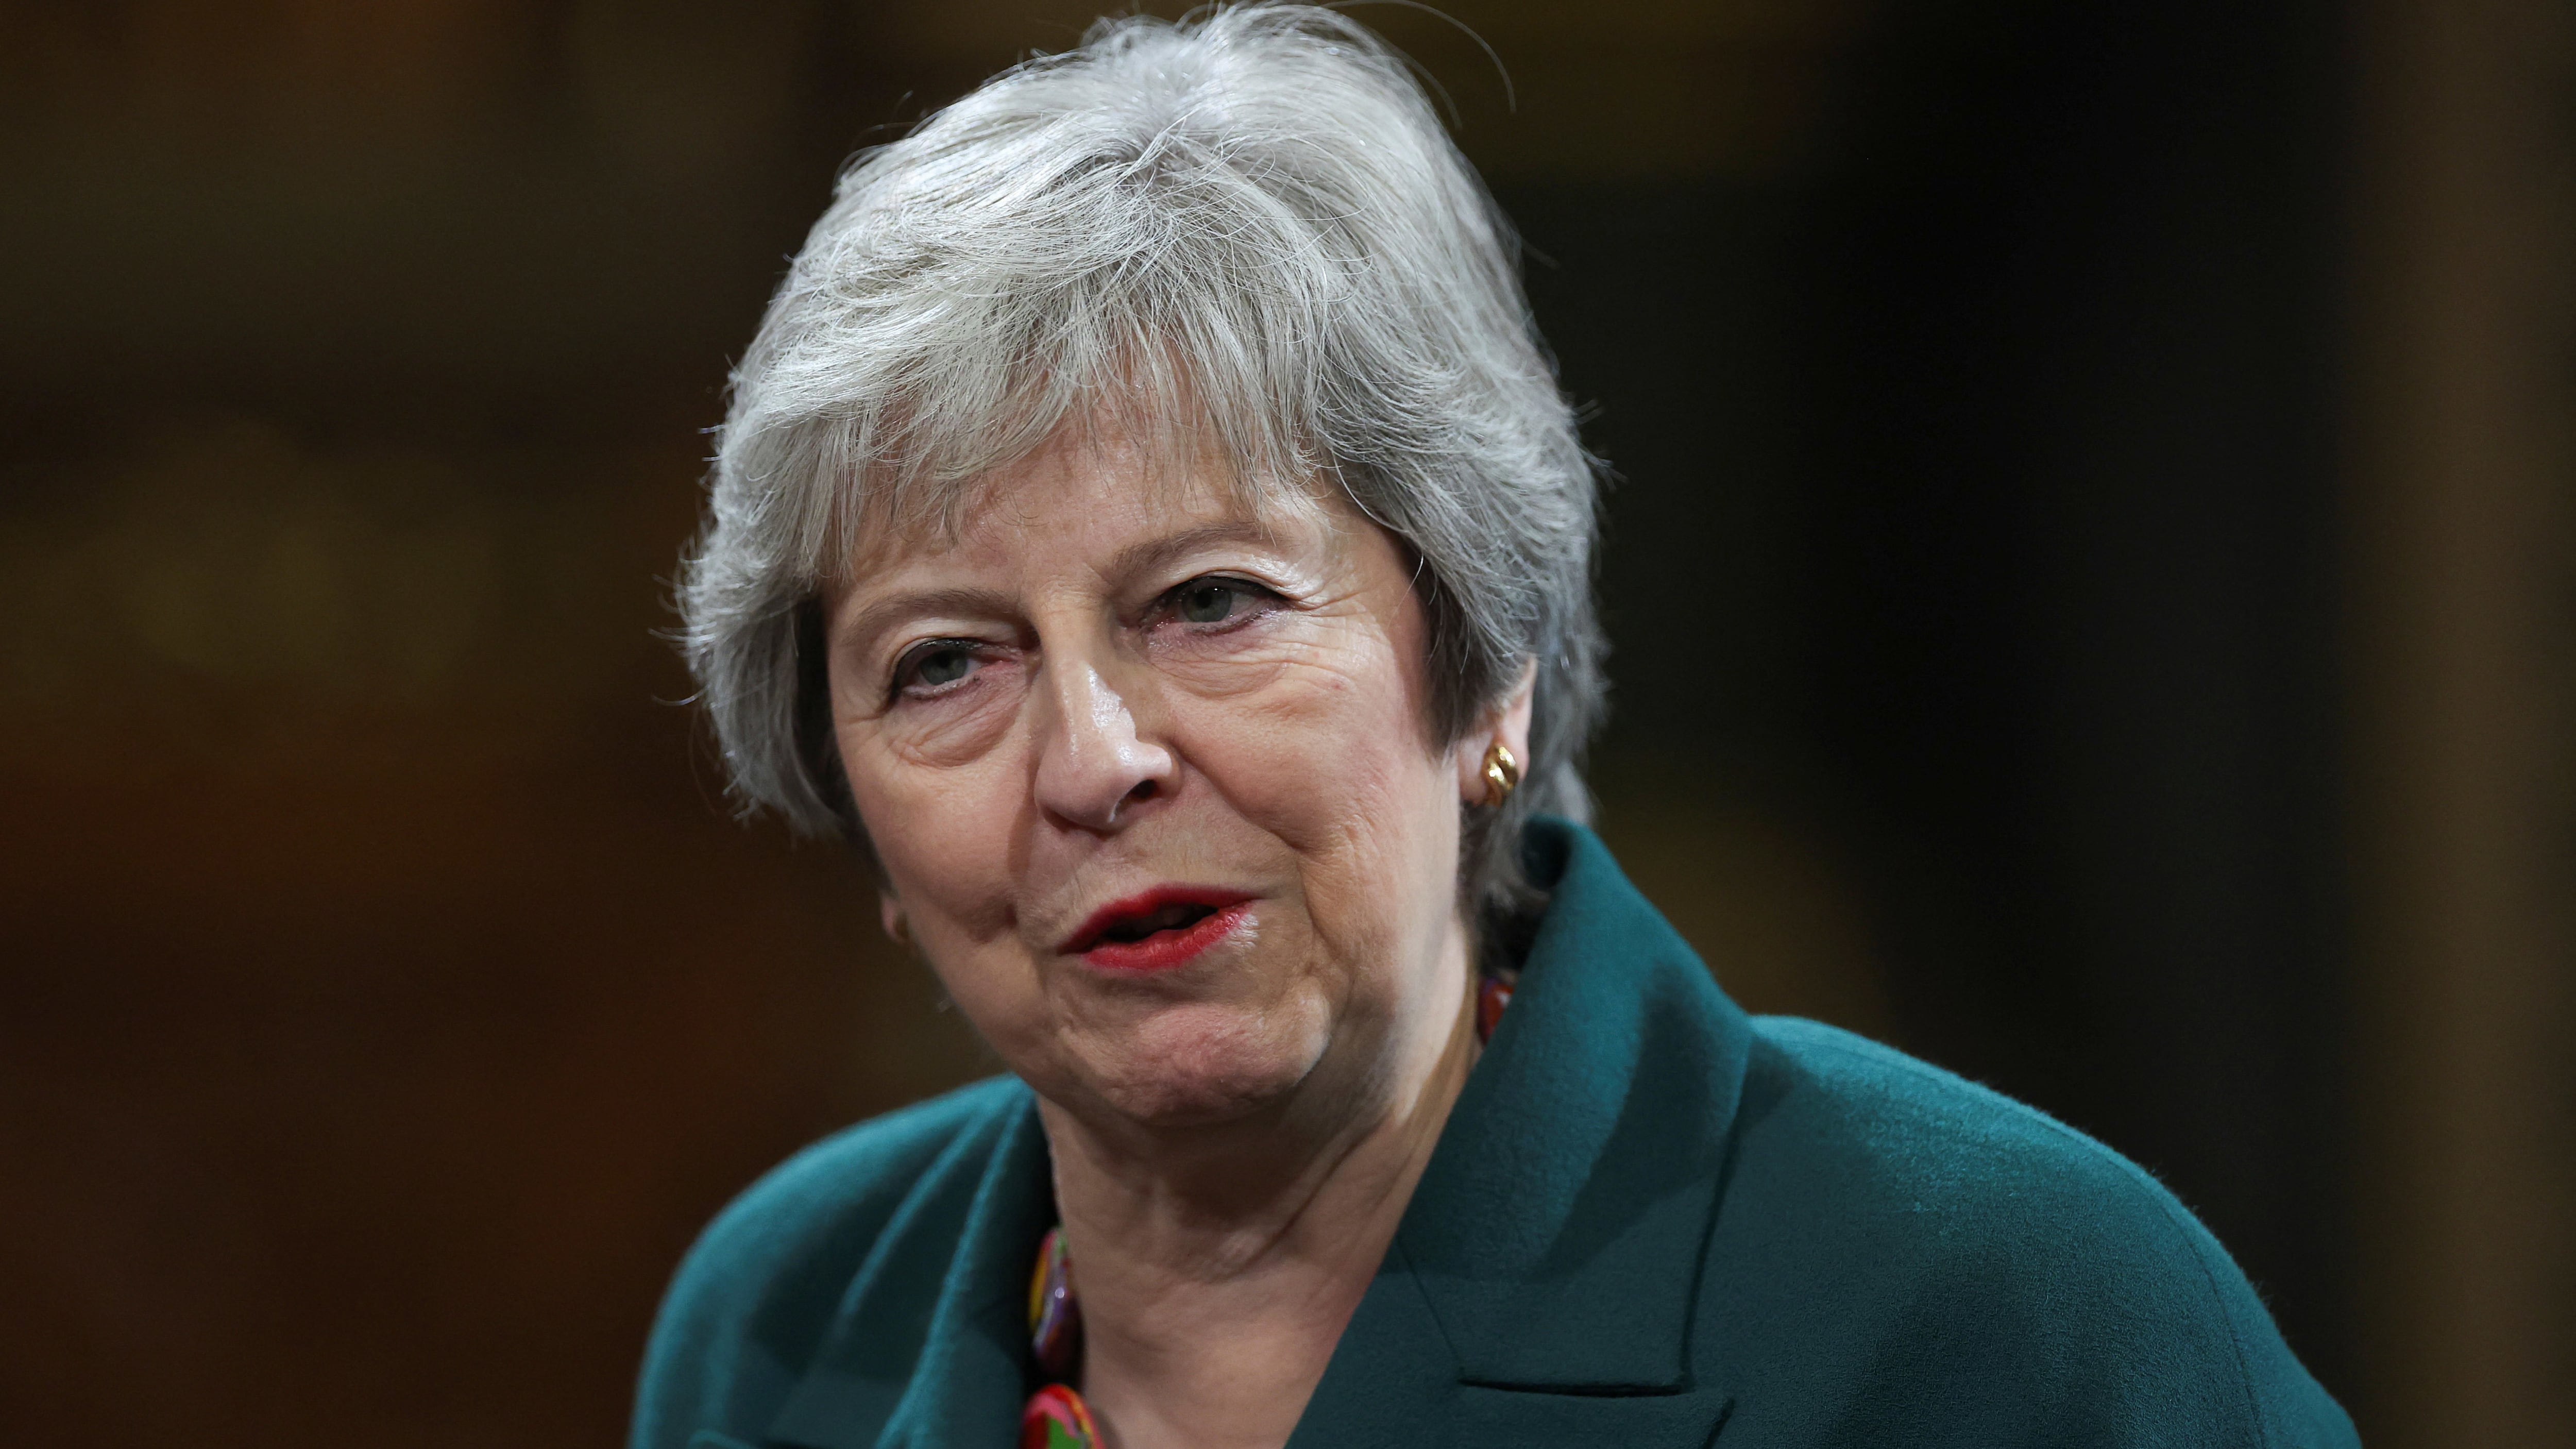 Former prime minister Theresa May has been given a peerage